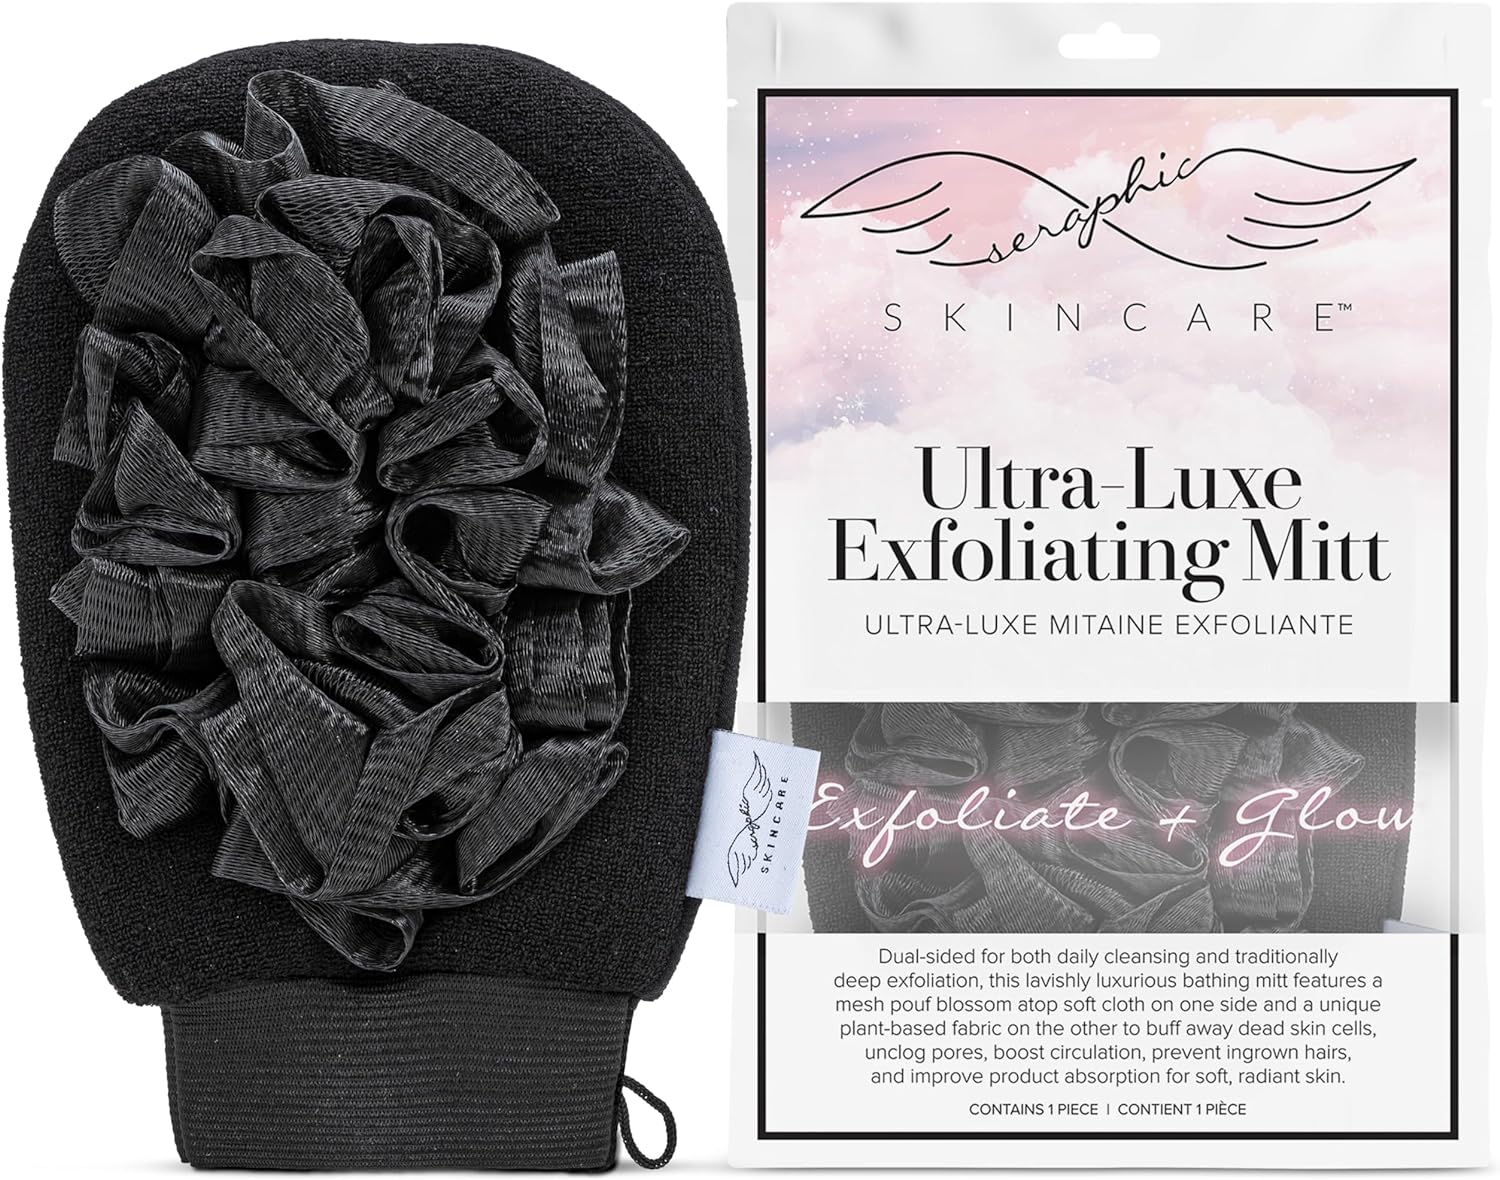 Seraphic Skincare Ultra-Luxe Exfoliating Mitt for Traditional Korean Exfoliation – Body Exfoliator with Mesh Shower Gloves for Gentle Cleansing, Viscose Fiber Loofah to Exfoliate and Rejuvenate Skin